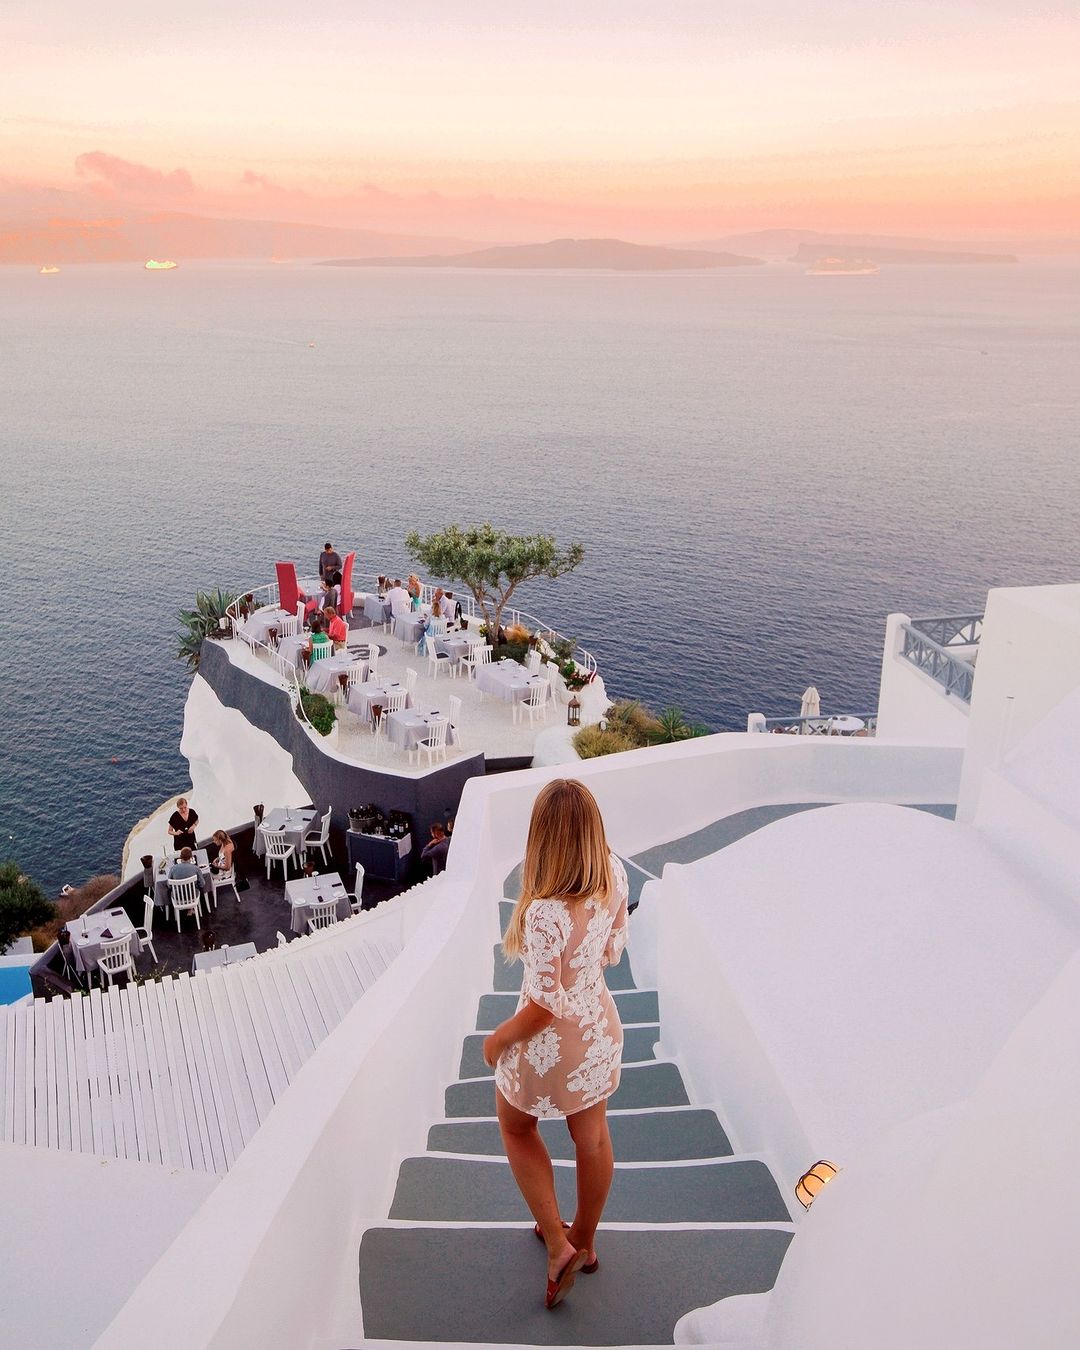 Stepping into paradise, one breathtaking view at a time